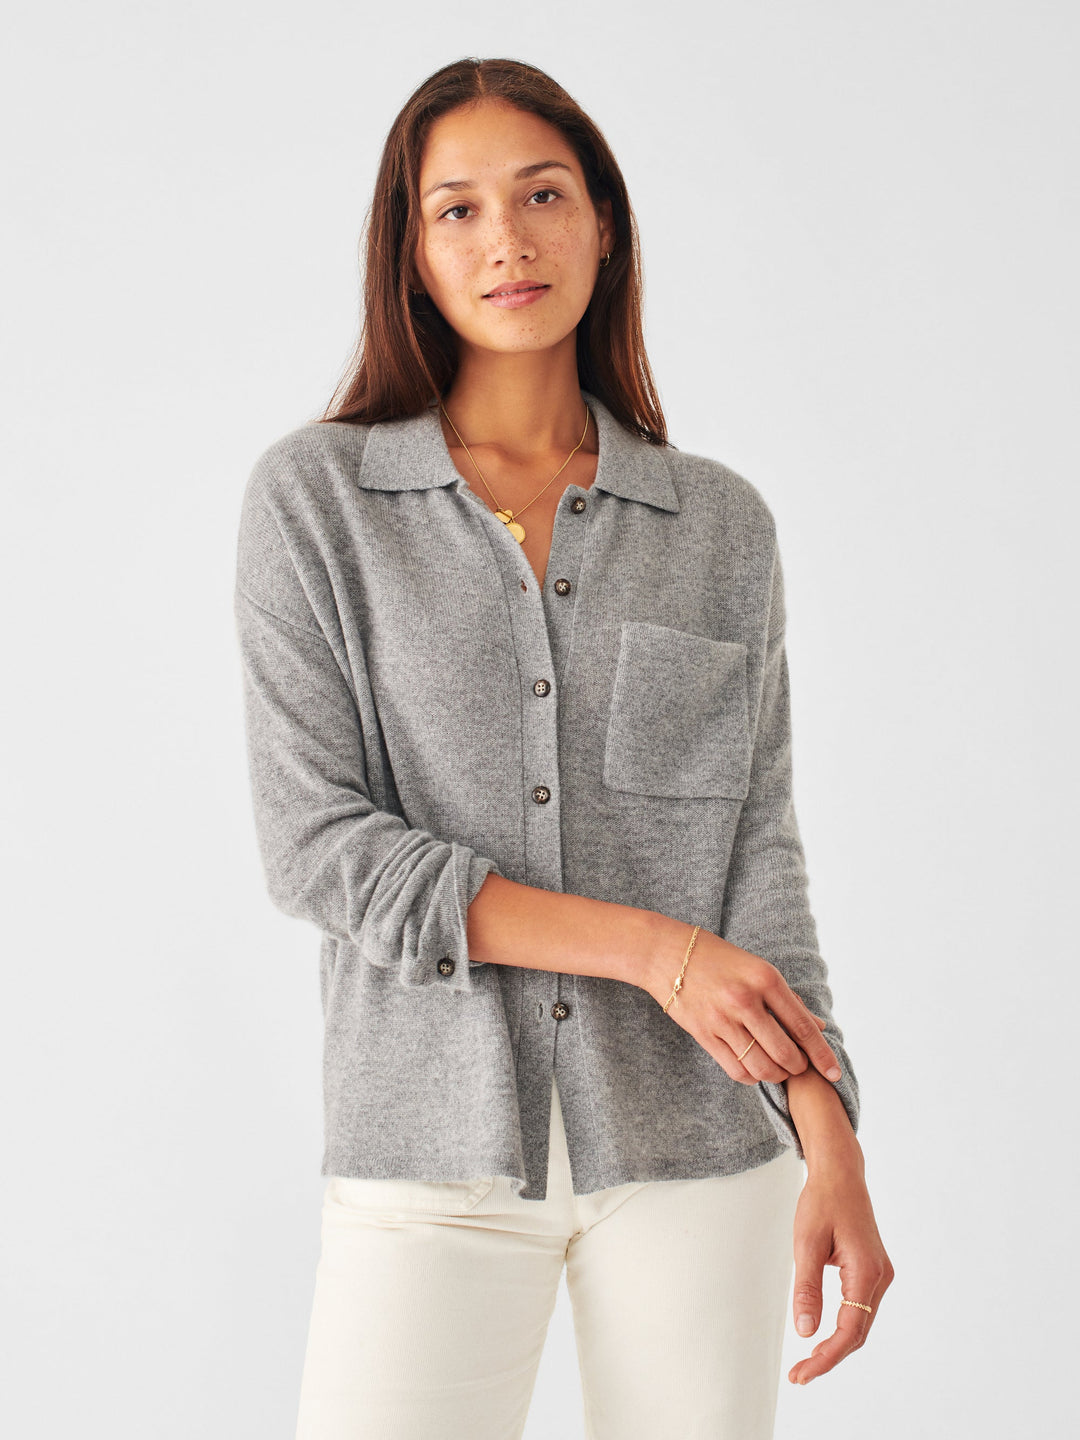 CASHMERE SWEATER SHIRT-HEATHER GREY - Kingfisher Road - Online Boutique